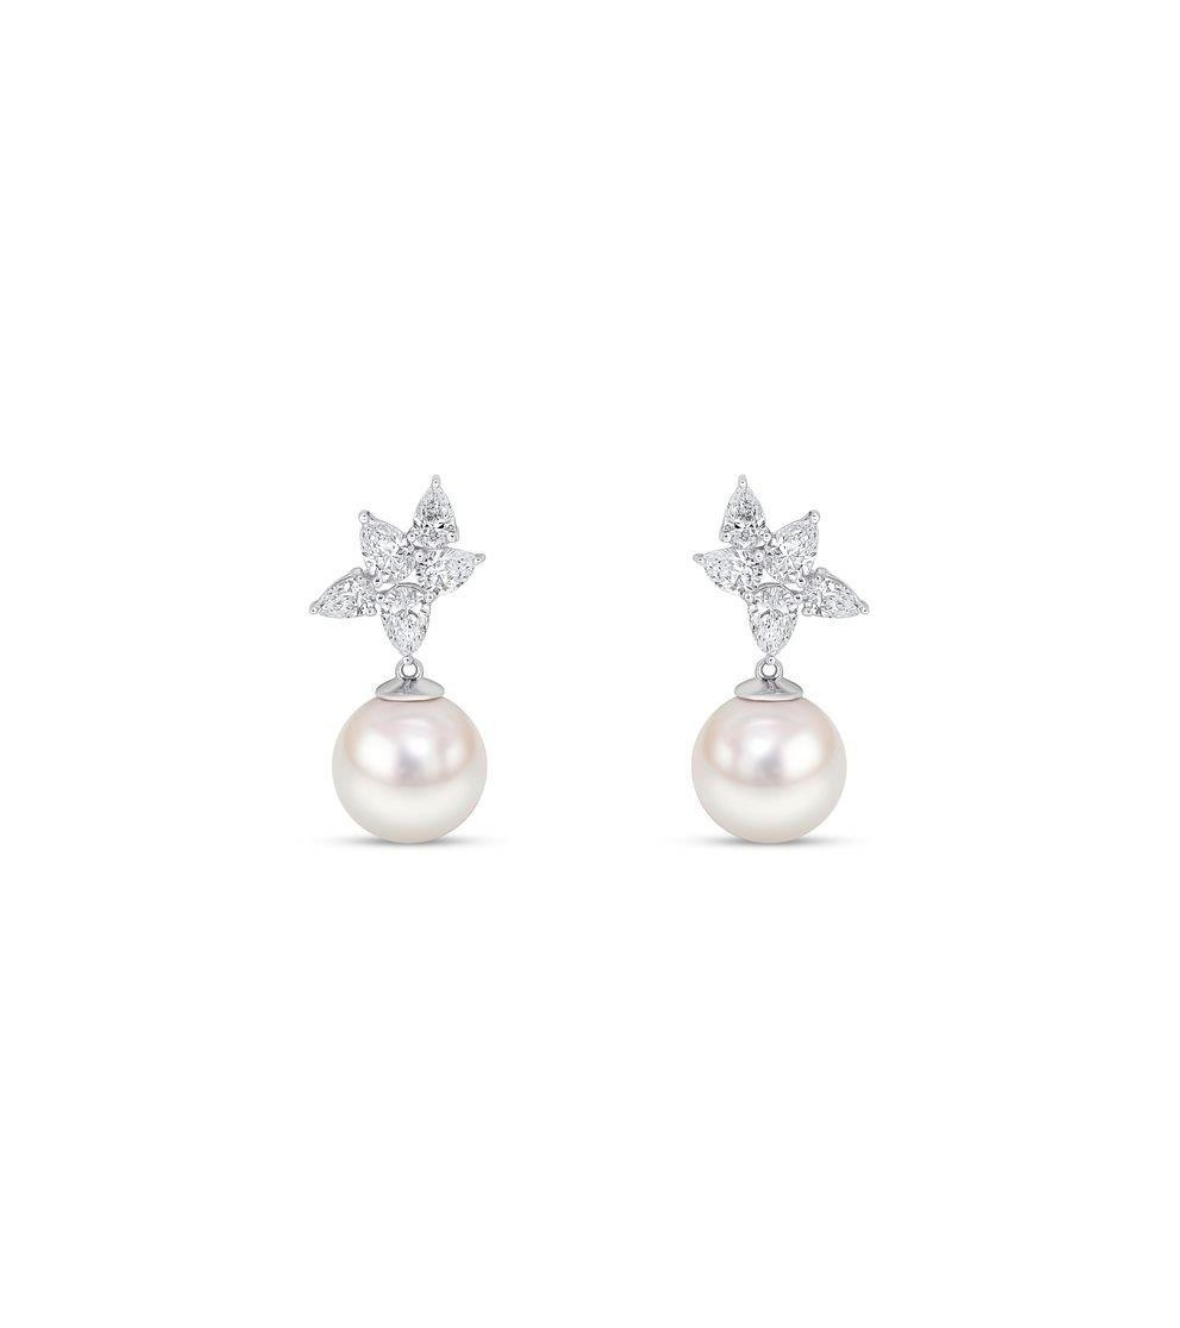 White Gold Earrings with Akoya Pearls and Diamonds